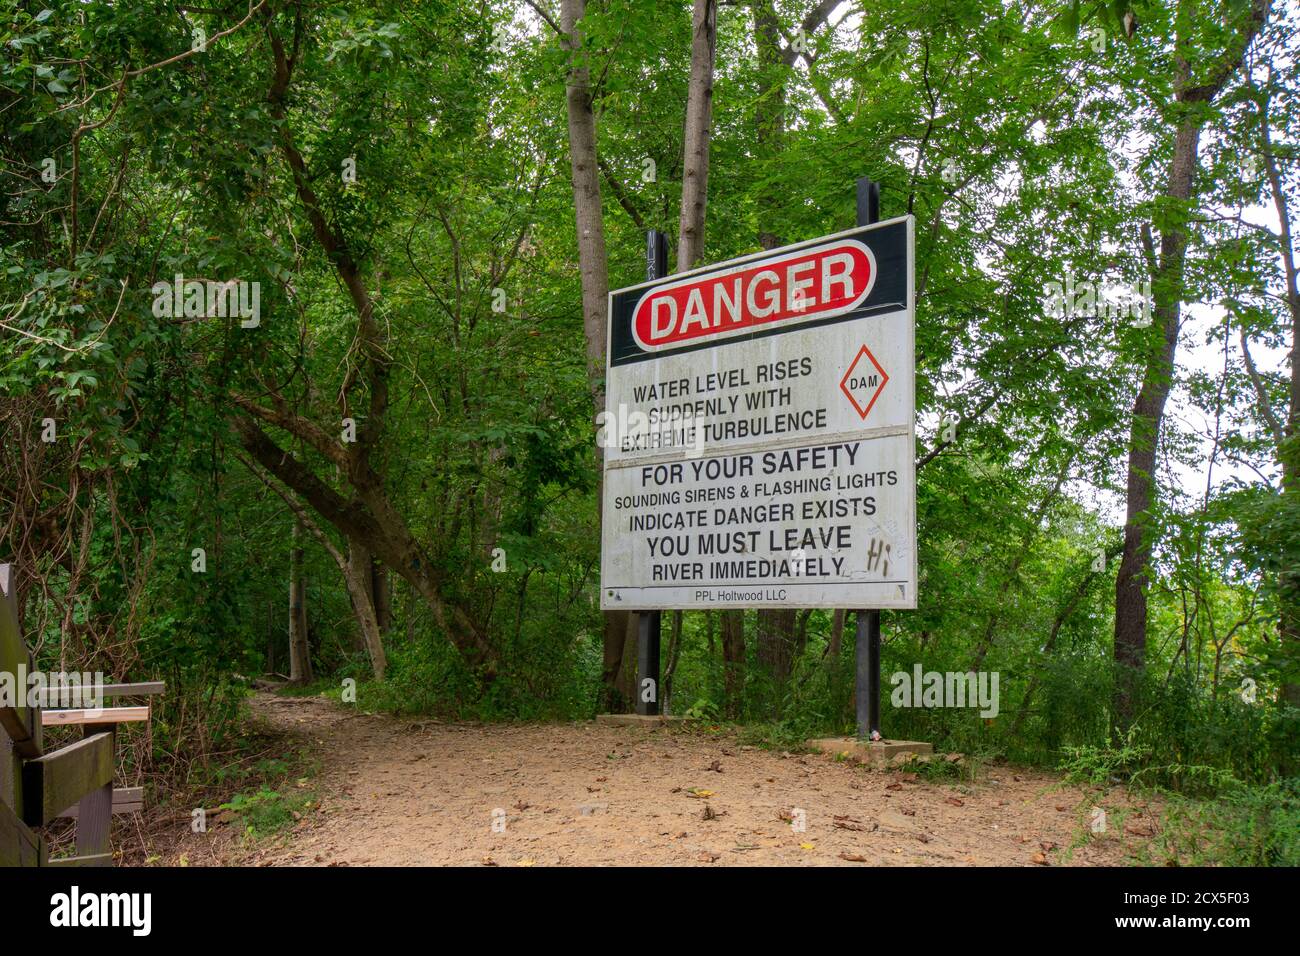 HOLTWOOD, PENNSYLVANIA - SEPTEMBER 9, 2020: A Sign Warns of Flashing Lights and Sirens Being an Indicator of a Siden Rise in Water Level. Located near Stock Photo